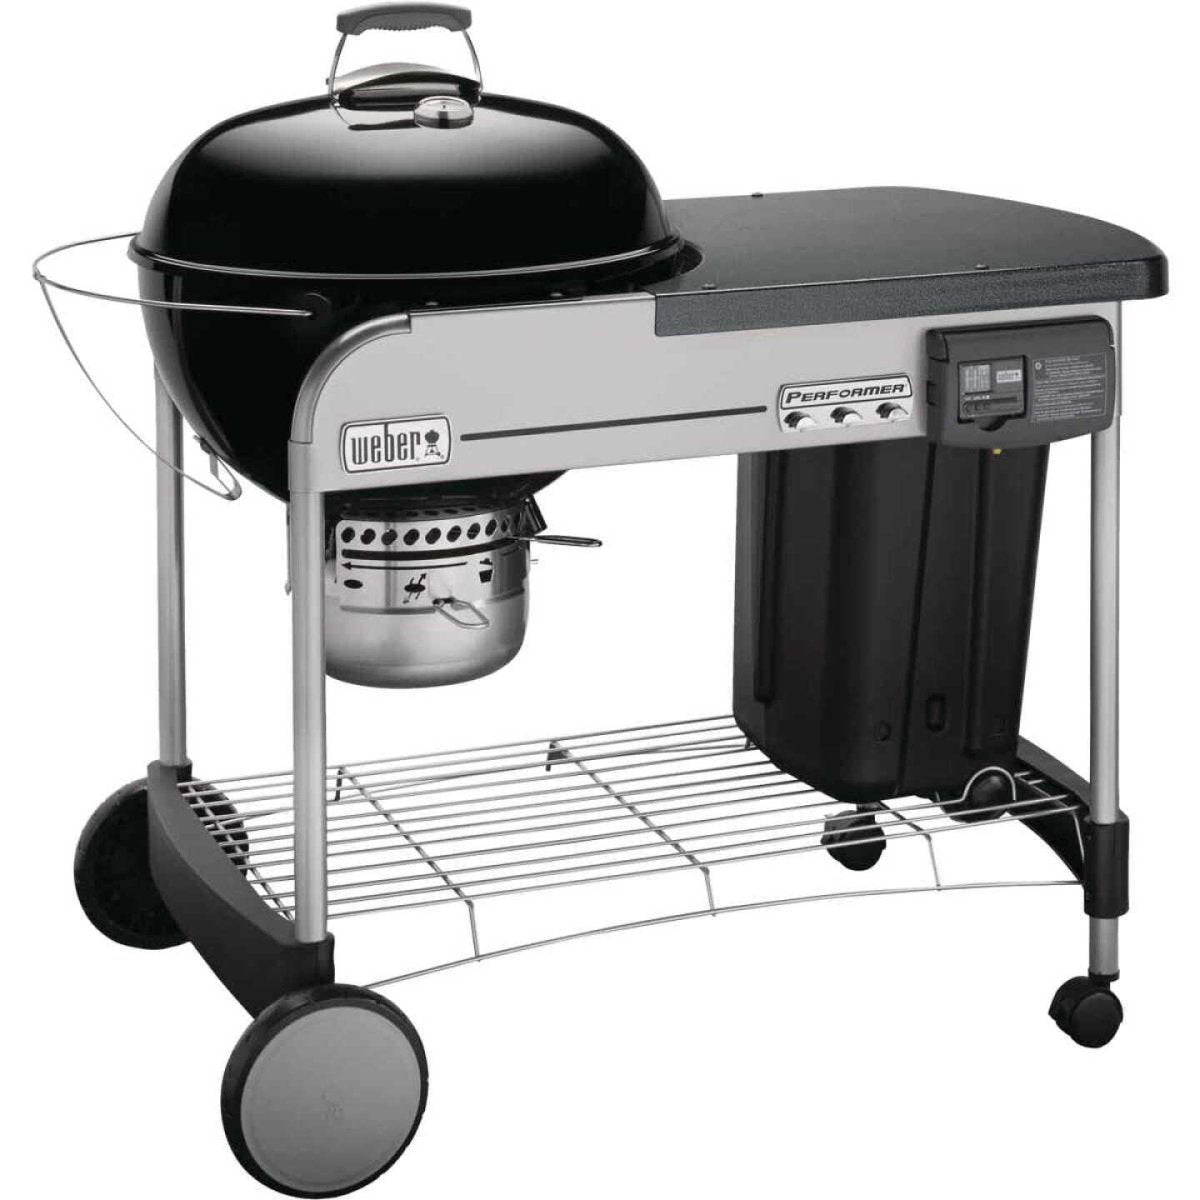 Weber Performer Deluxe Black Grill 15501001 - Texas Star Grill Shop 15501001